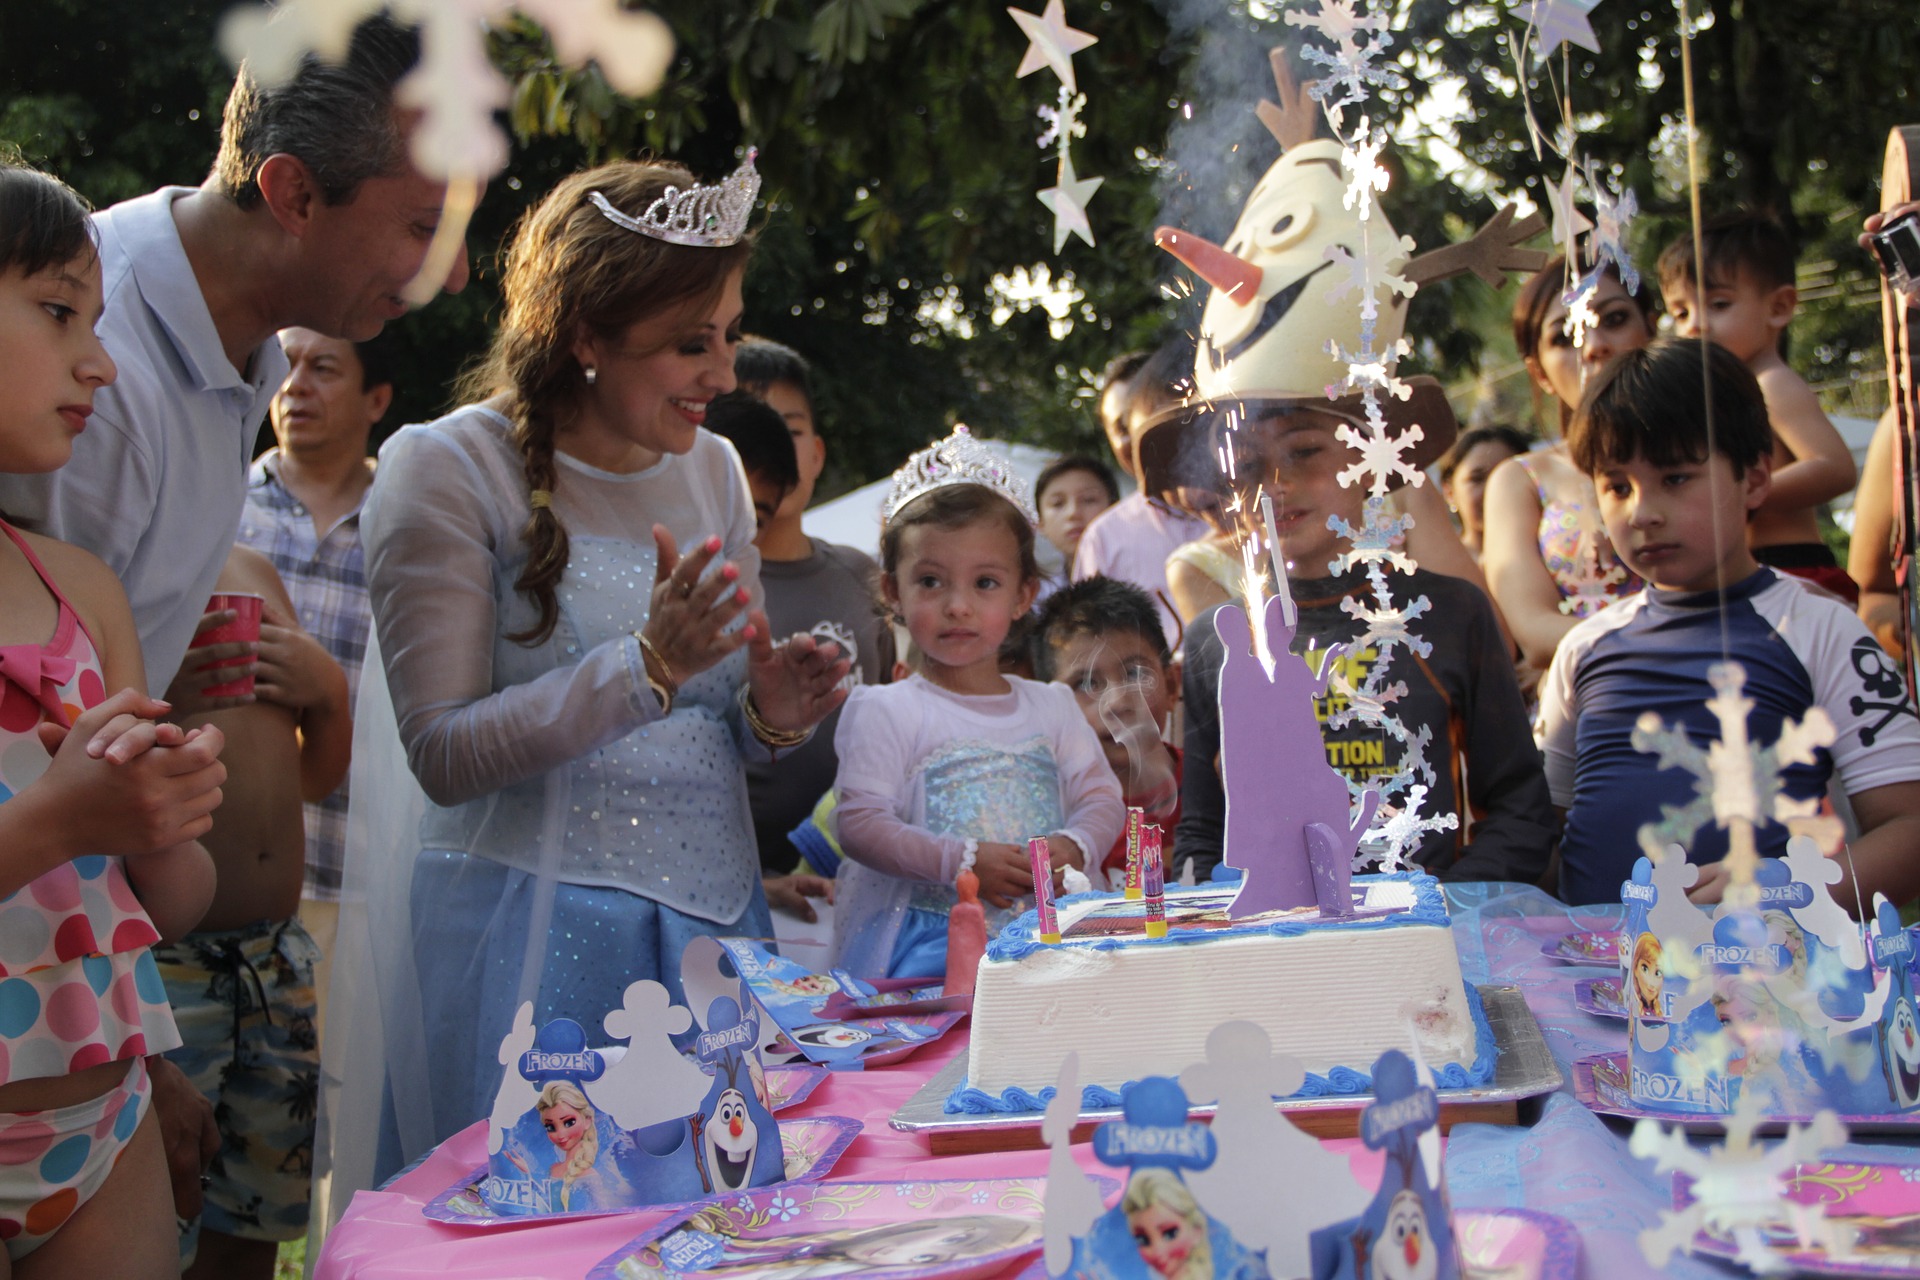 5 Top Kids Party Entertainment Ideas to Have An Awesome Birthday Party